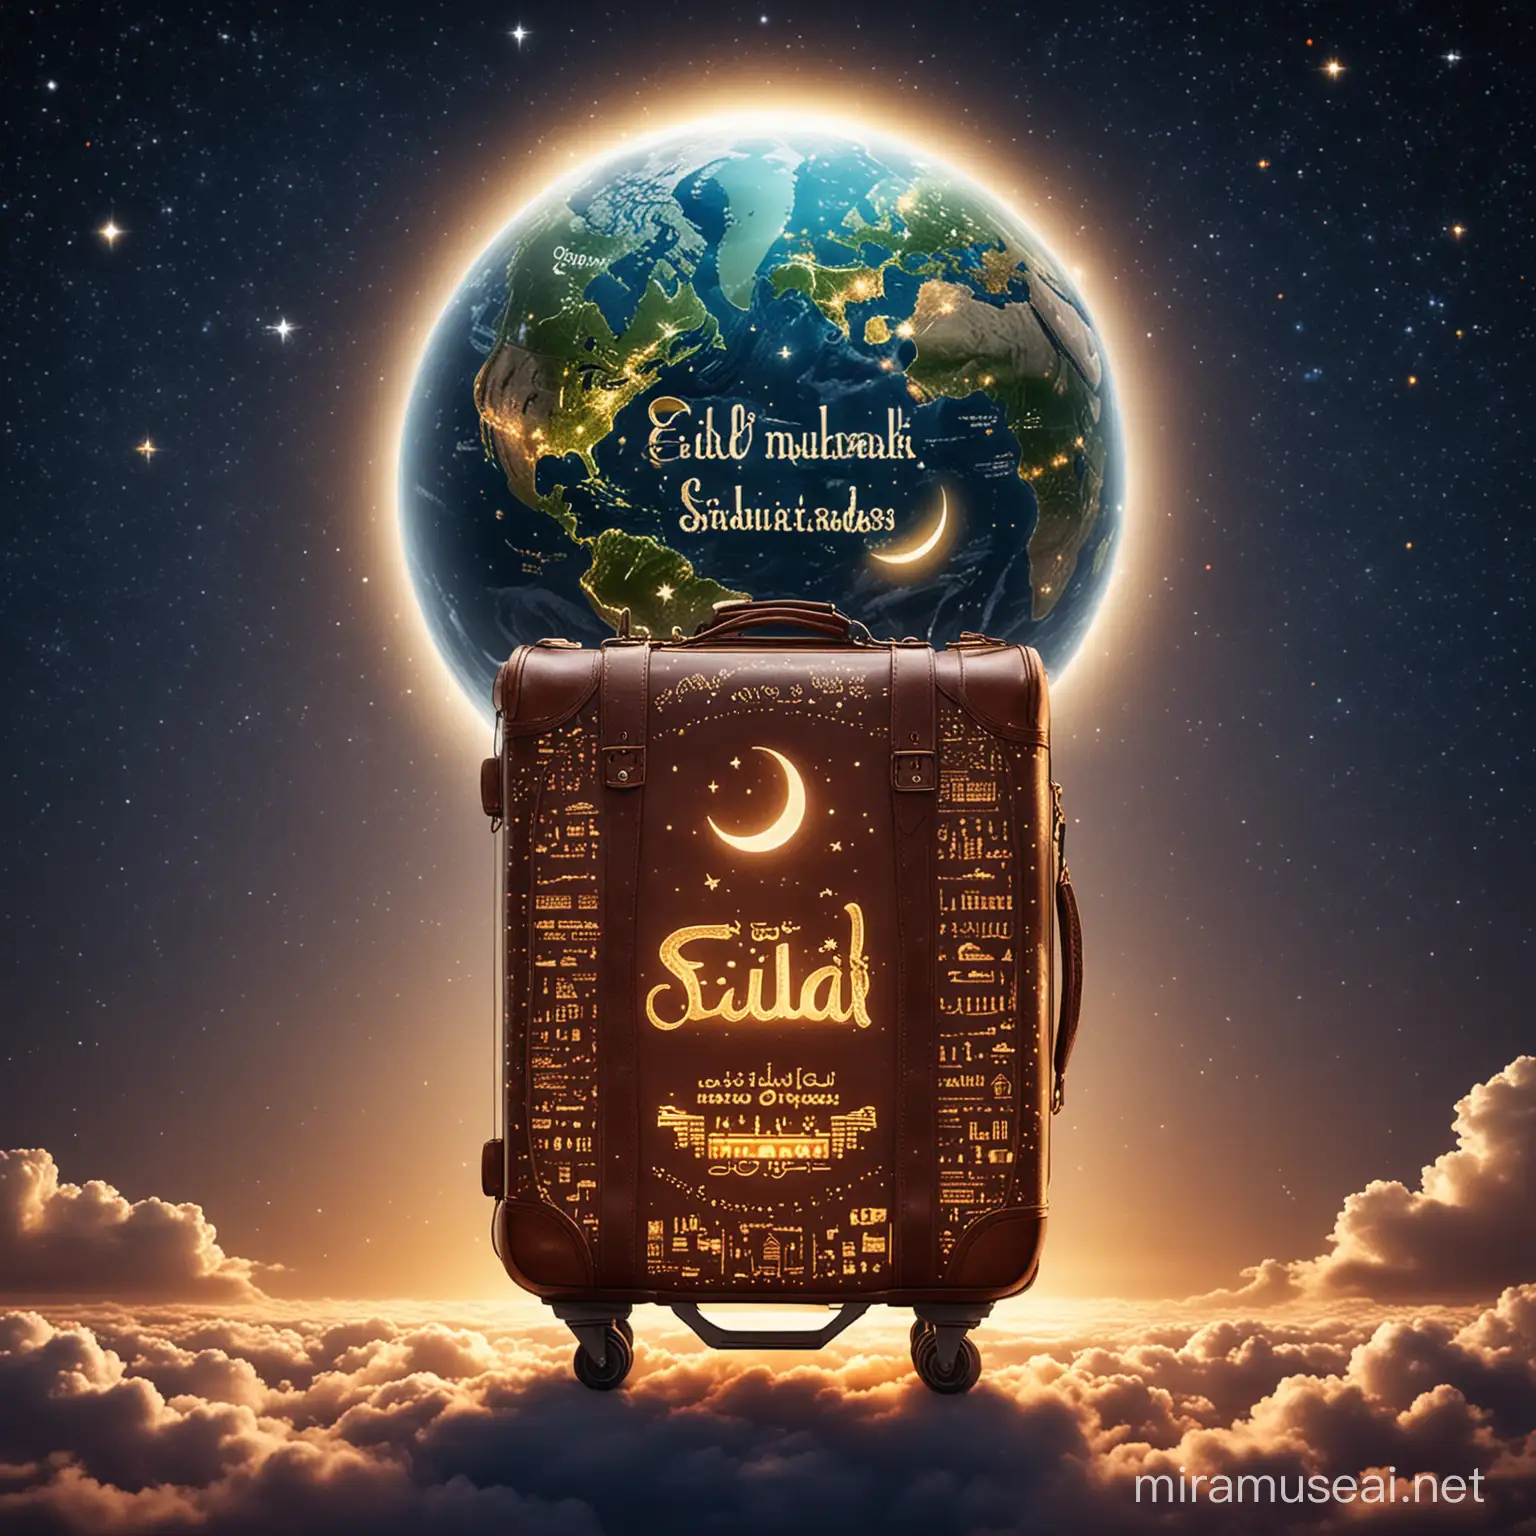 "Eid Mubarak text" travels creative. Make a beautiful trolley bag, set on top of a globe with a moon shining brightly on the night sky